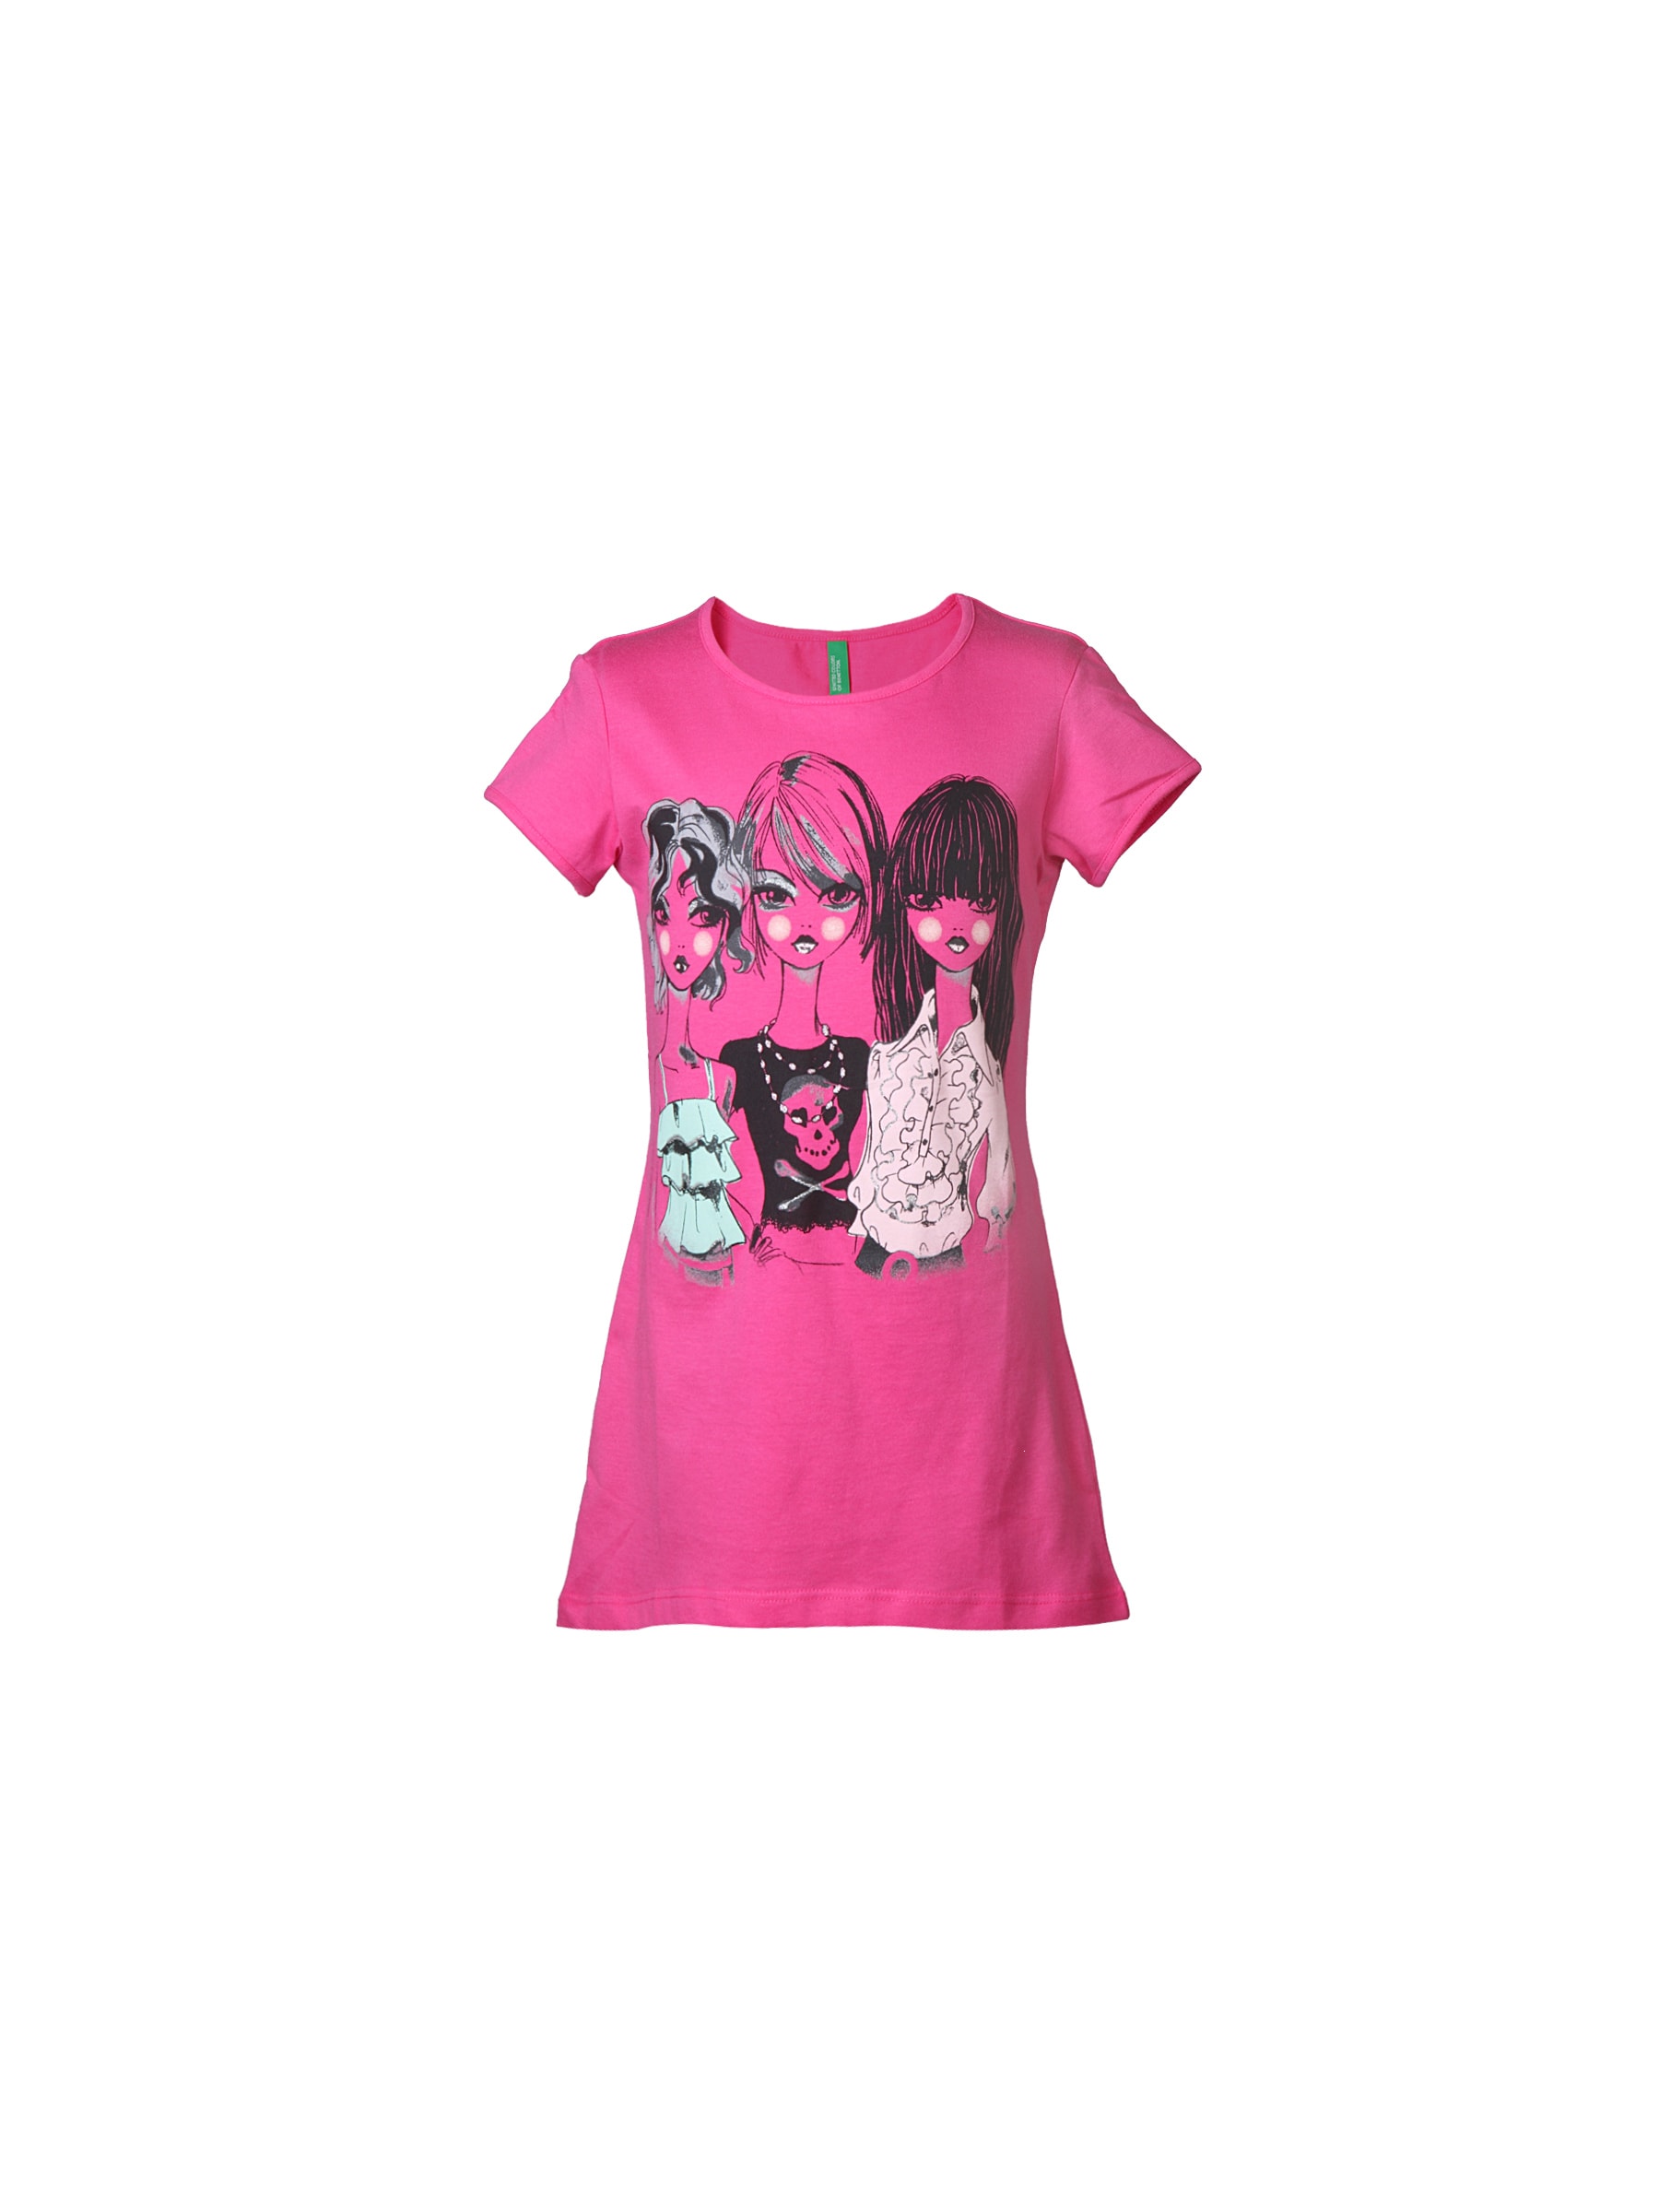 United Colors of Benetton Kids Girls Pink Printed Top